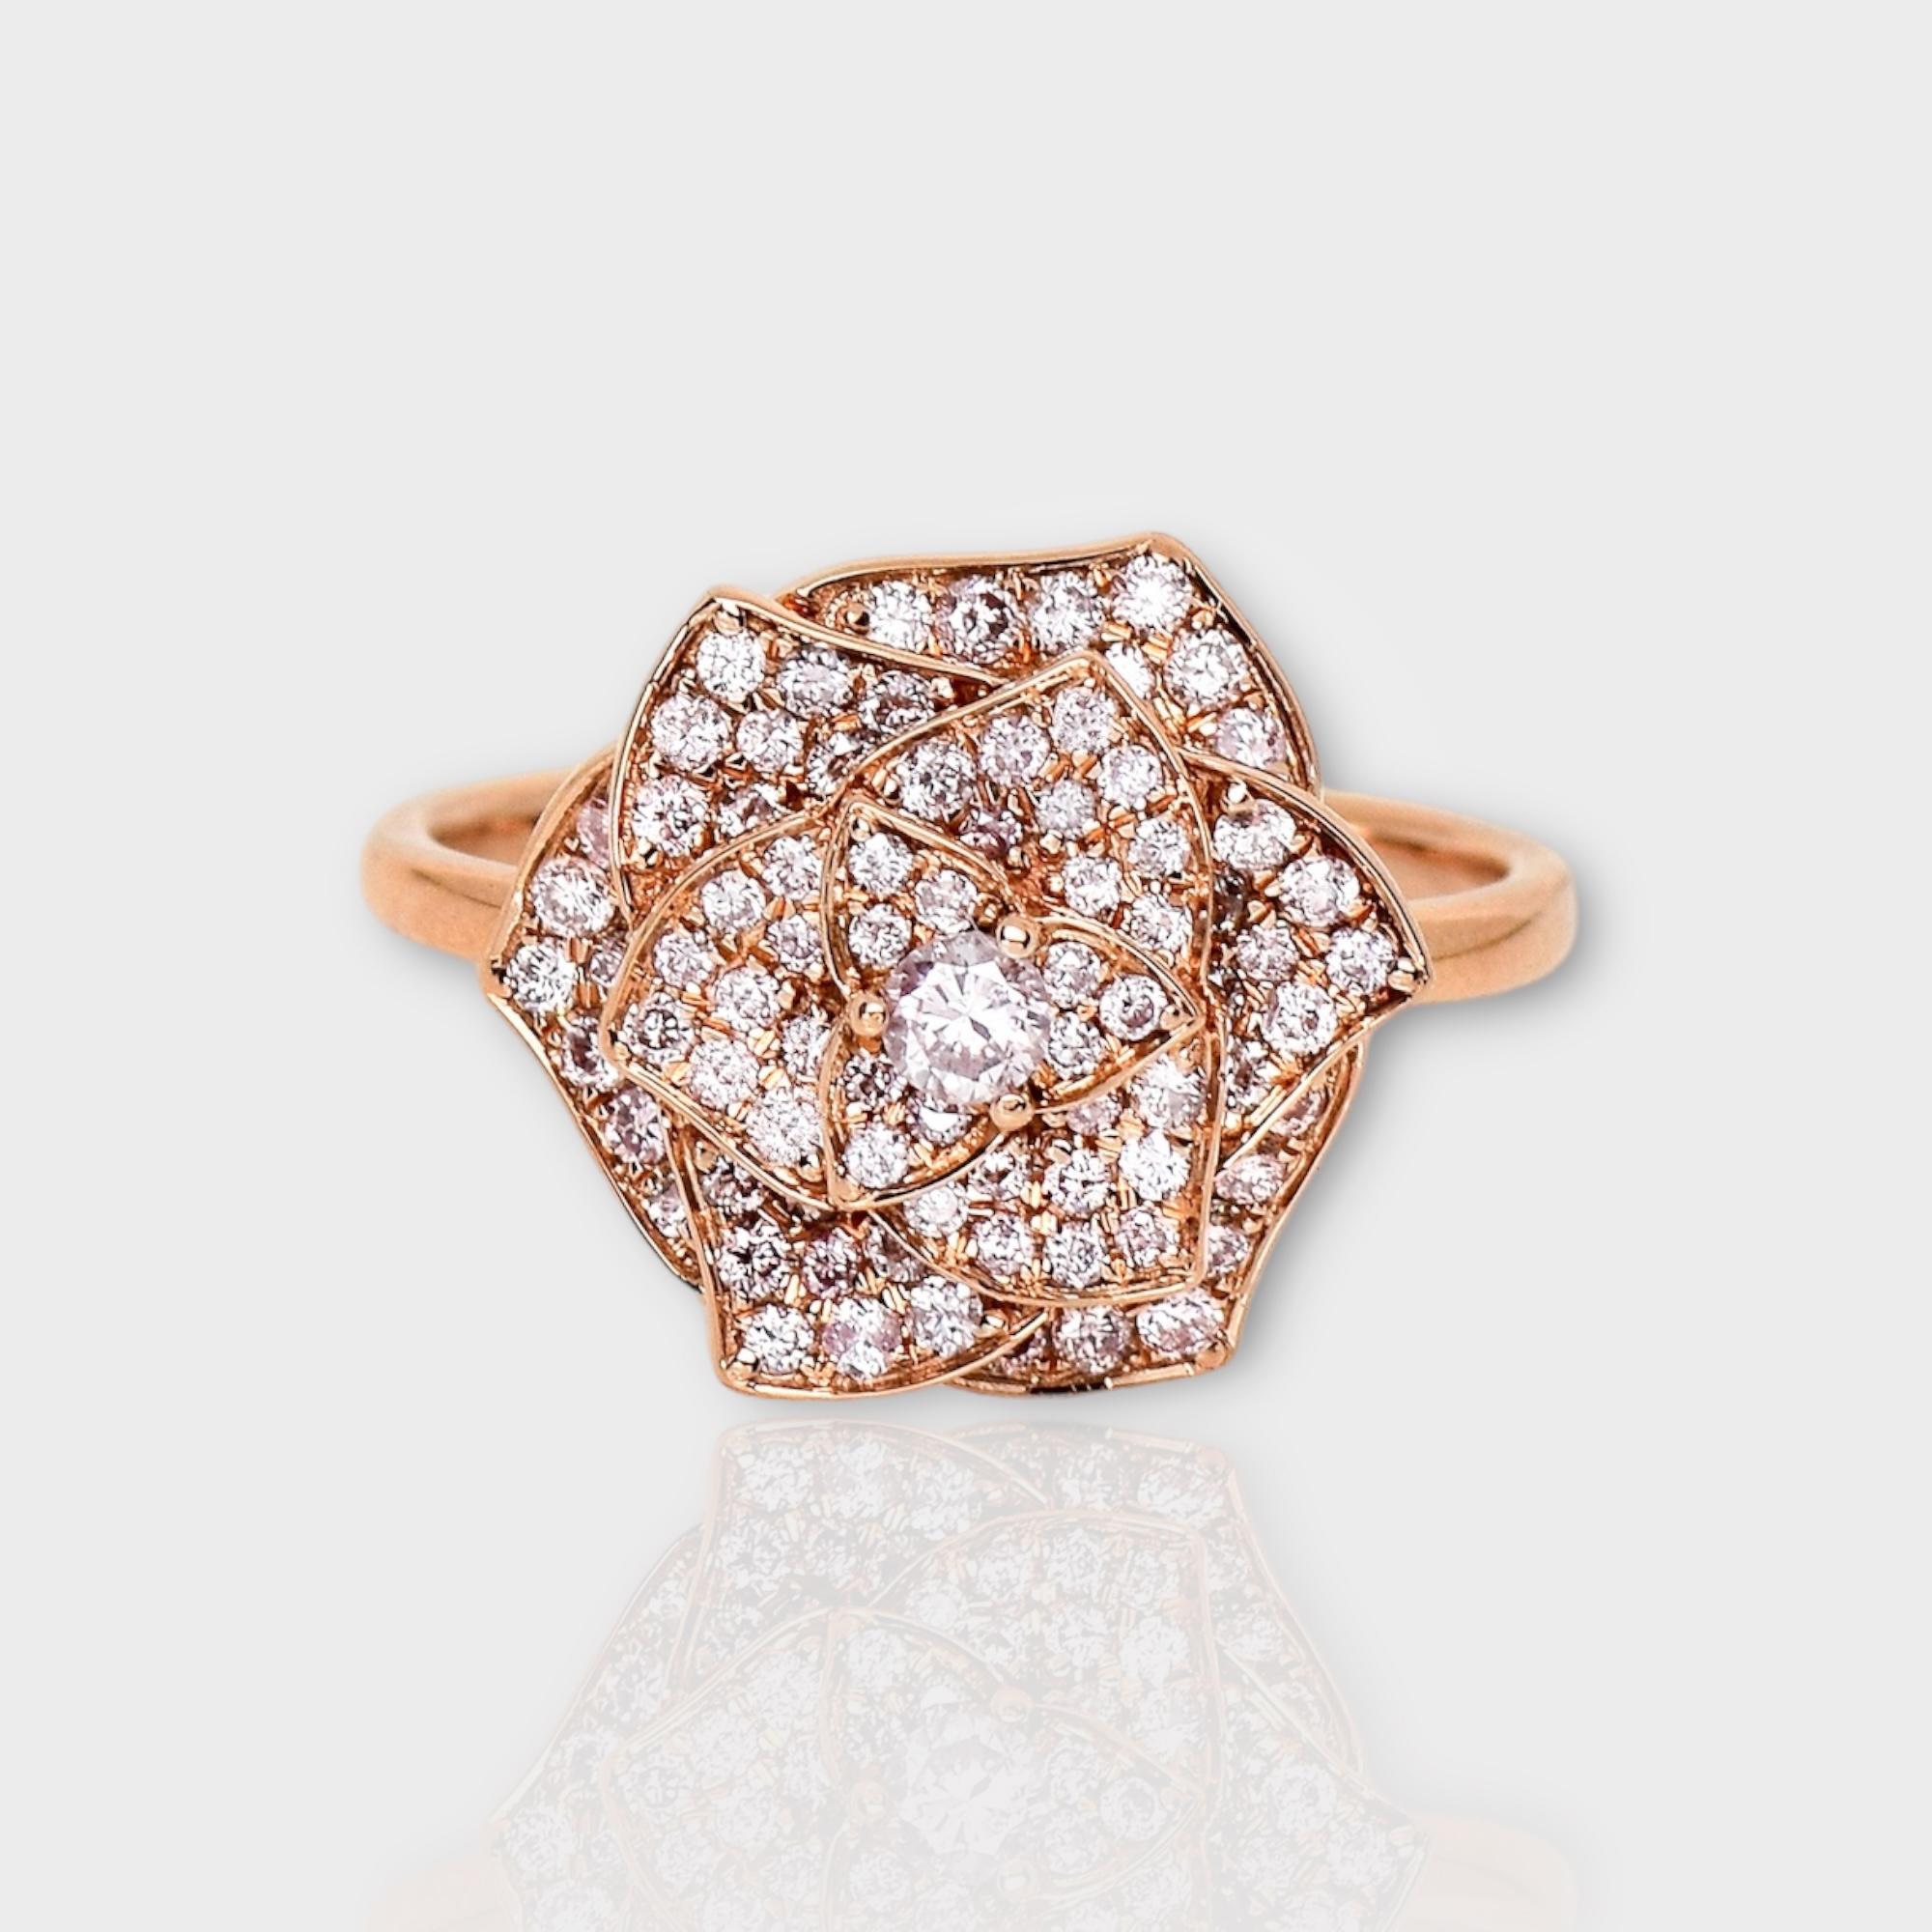 *IGI 14K 0.60 ct Natural Pink Diamonds Rose Design  Antique Art Deco Ring*

This band features a stunning design with a rose crafted from 14K rose gold. It is set with natural pink diamonds weighing 0.60 carats.

This necklace features colorful